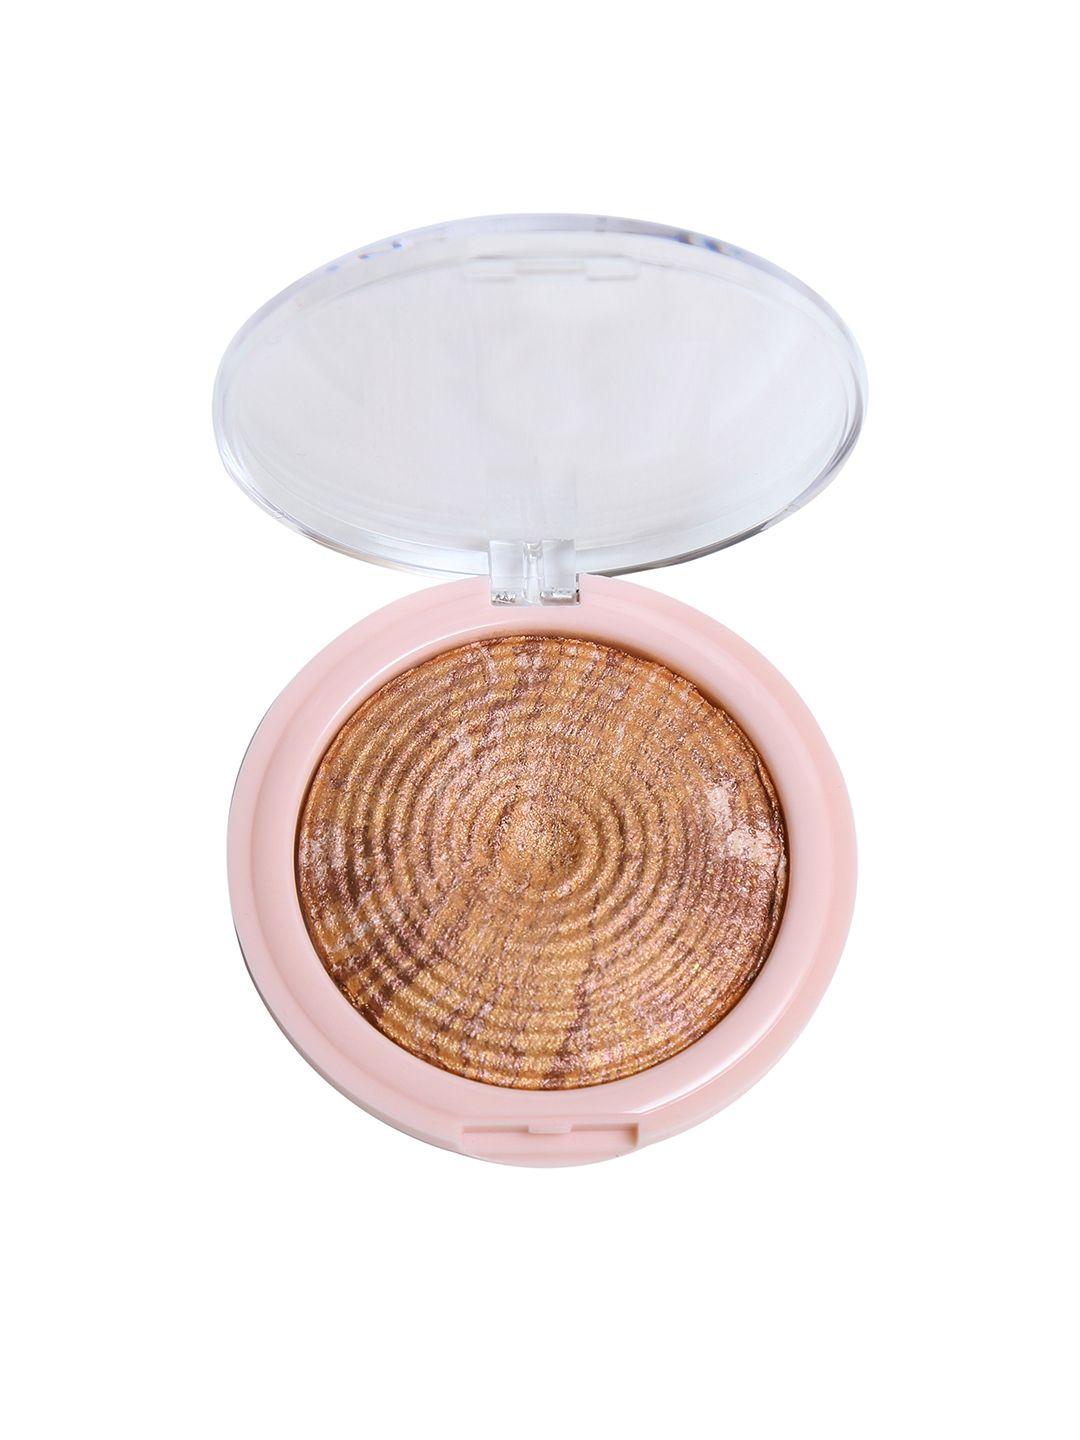 miss-claire-05-baked-blusher-8g